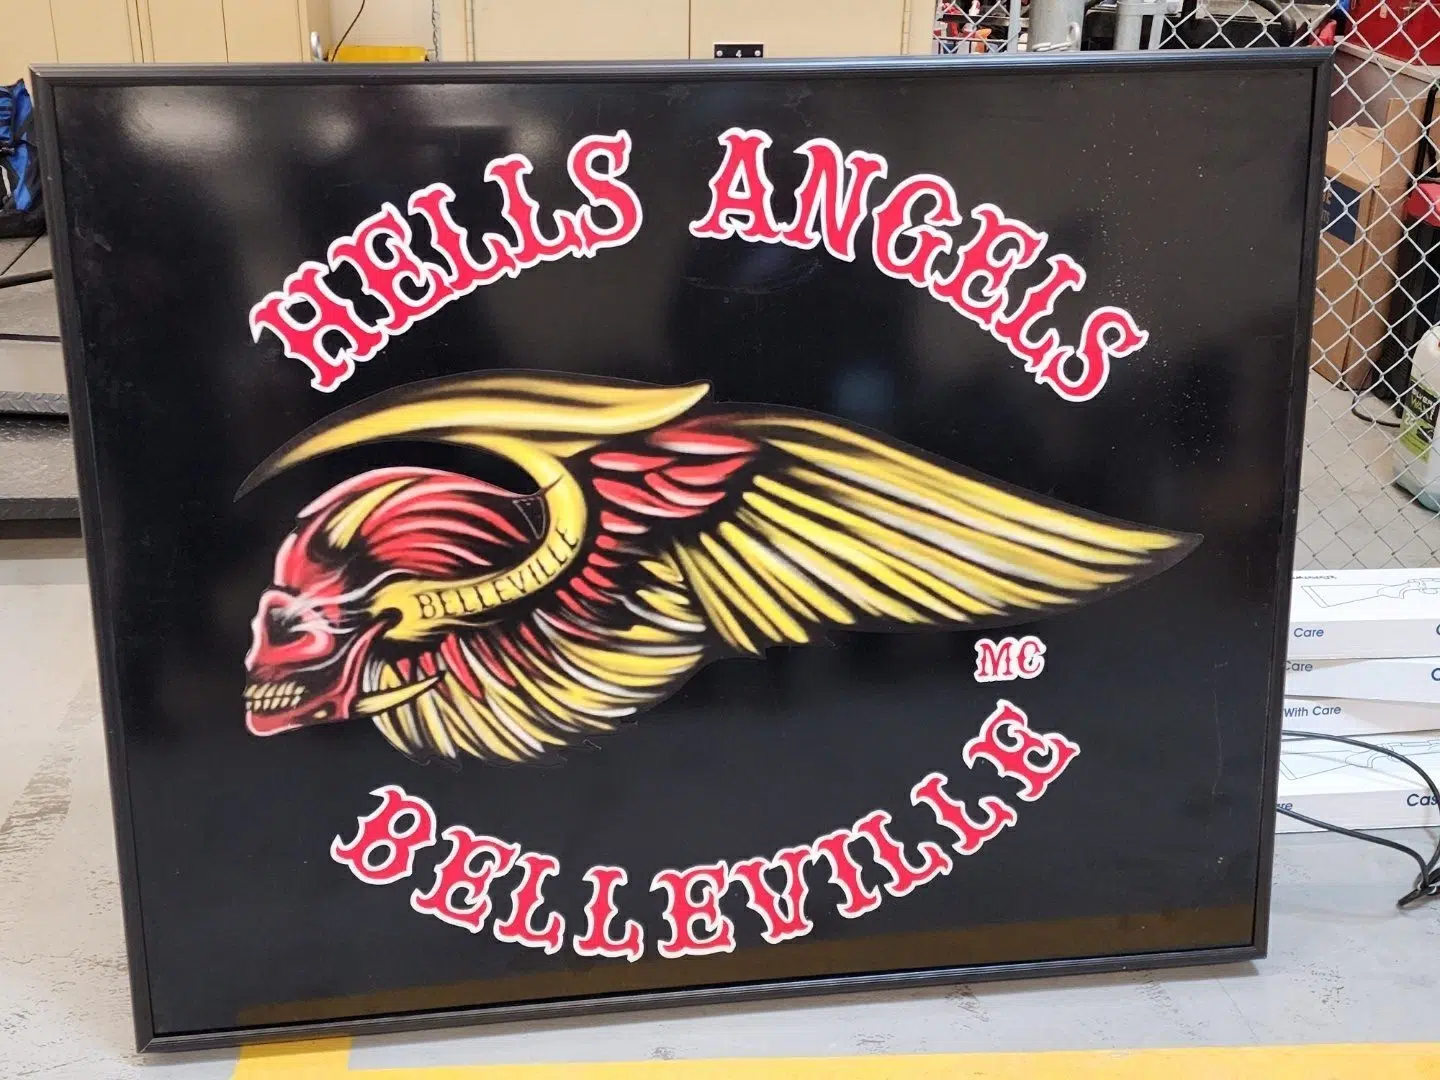 Project Coyote results in arrest of local Hells Angels and Red Devils members